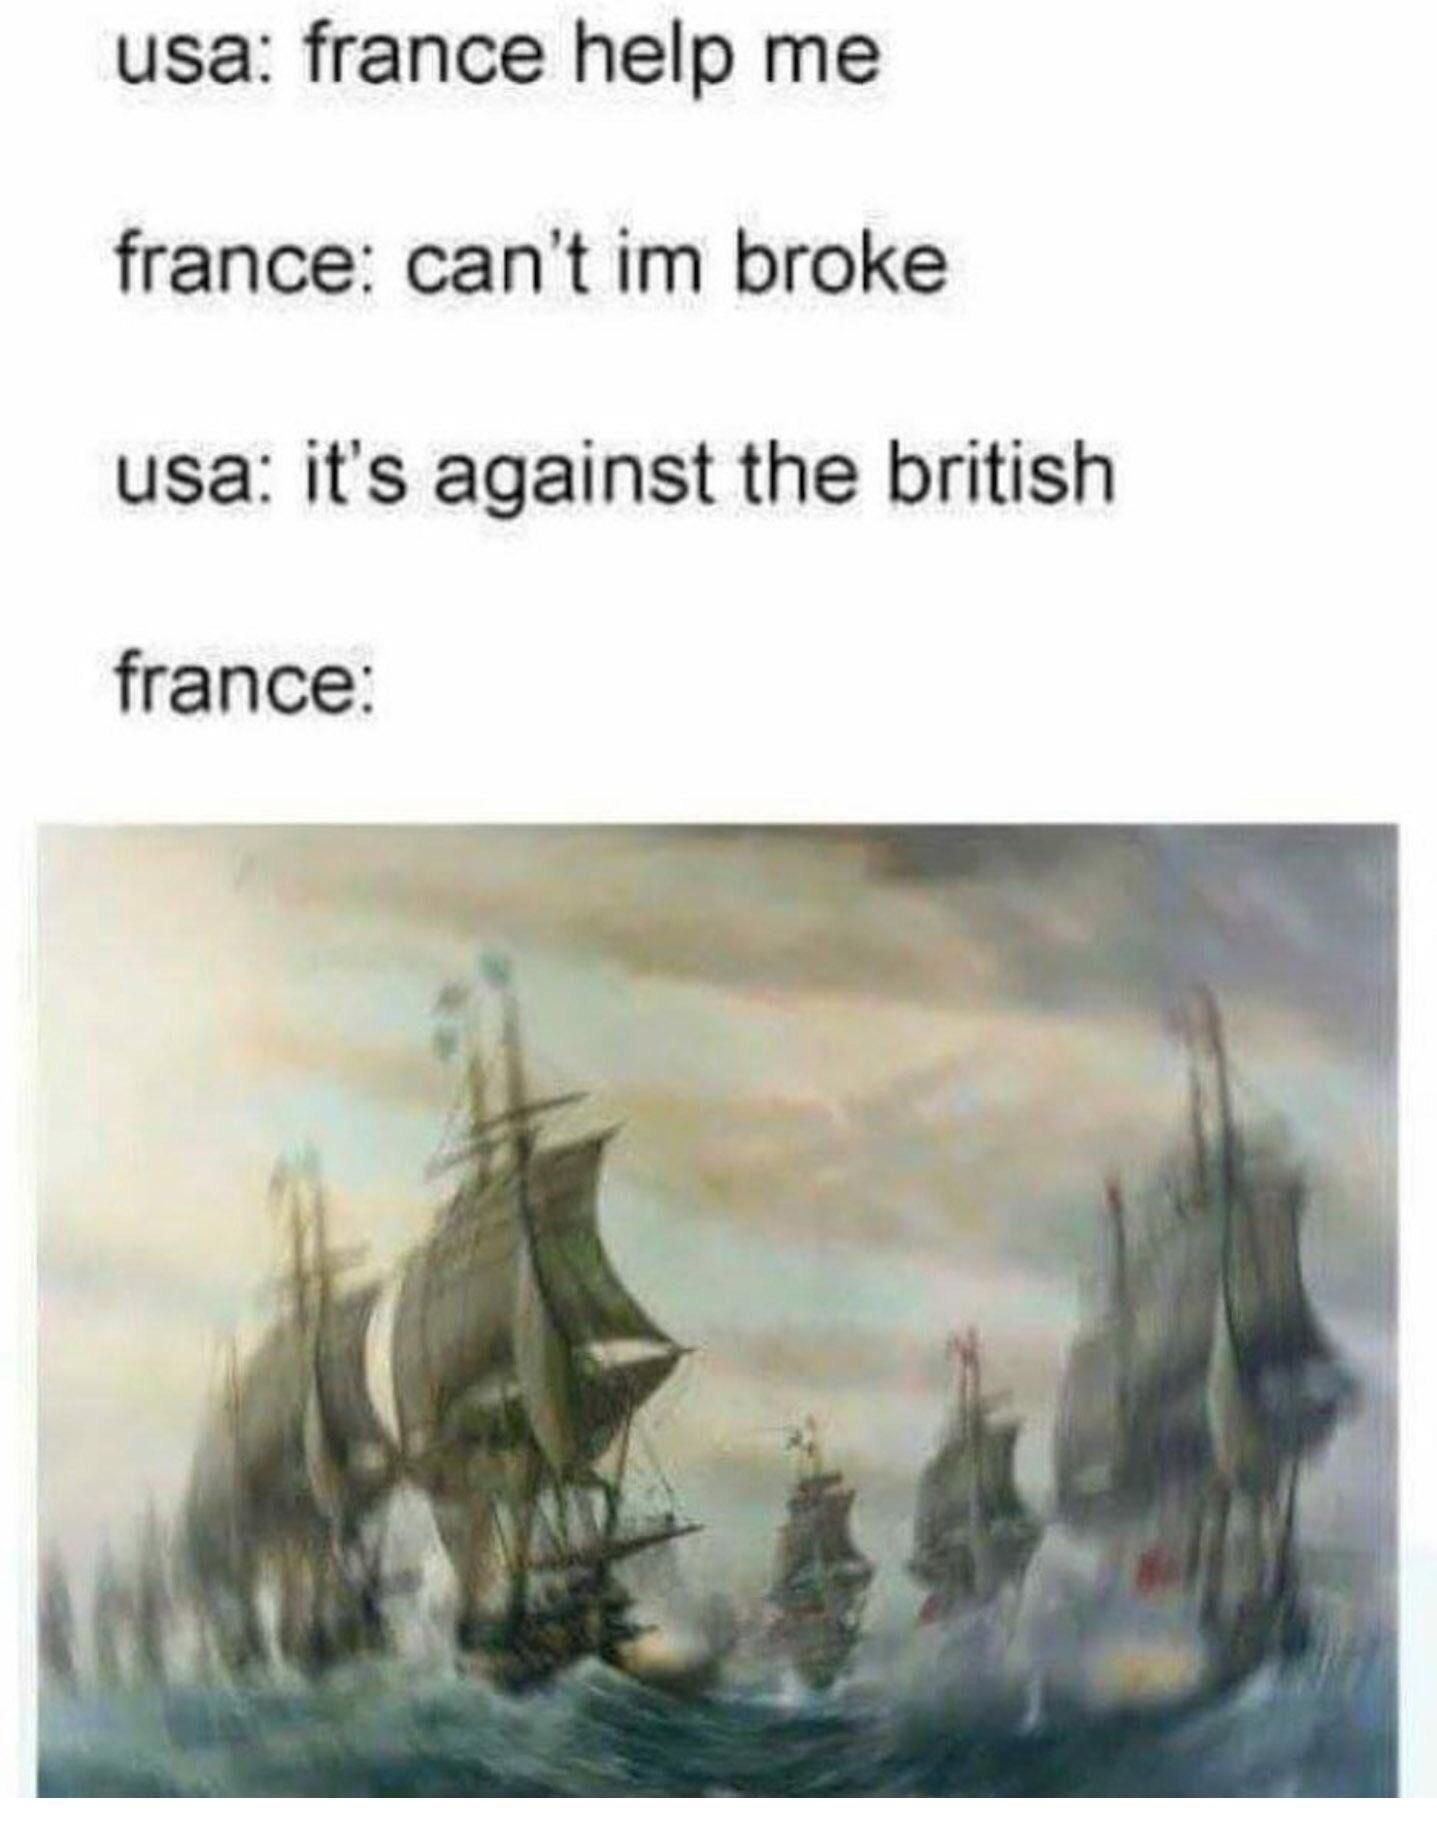 How France got involved in the American revolutionary war c. 1778